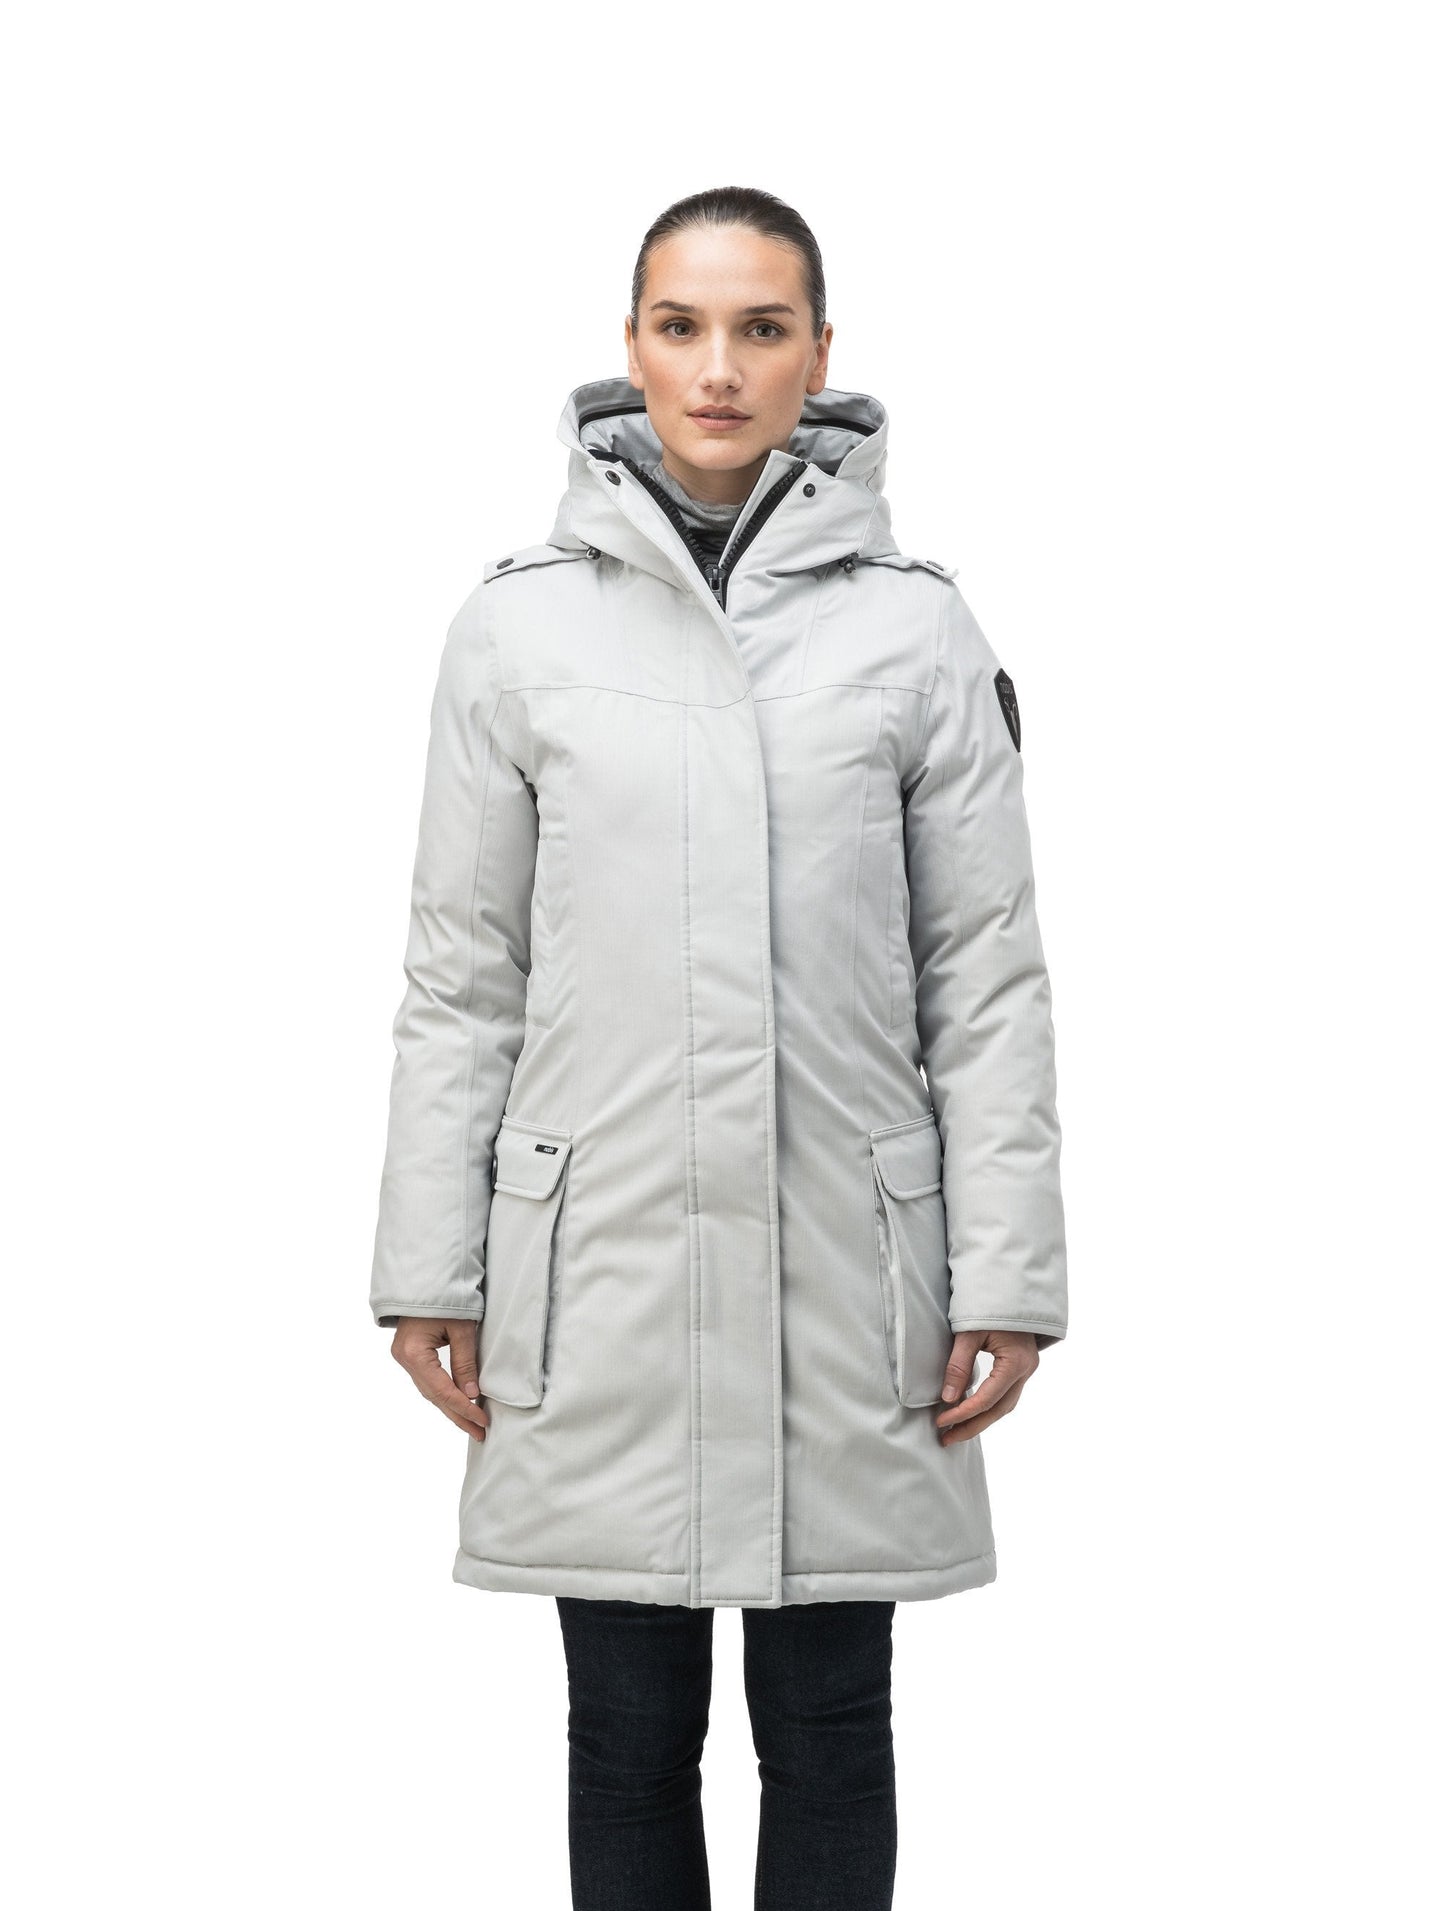 Women's knee length down filled parka with fur trim hood in CH Light Grey